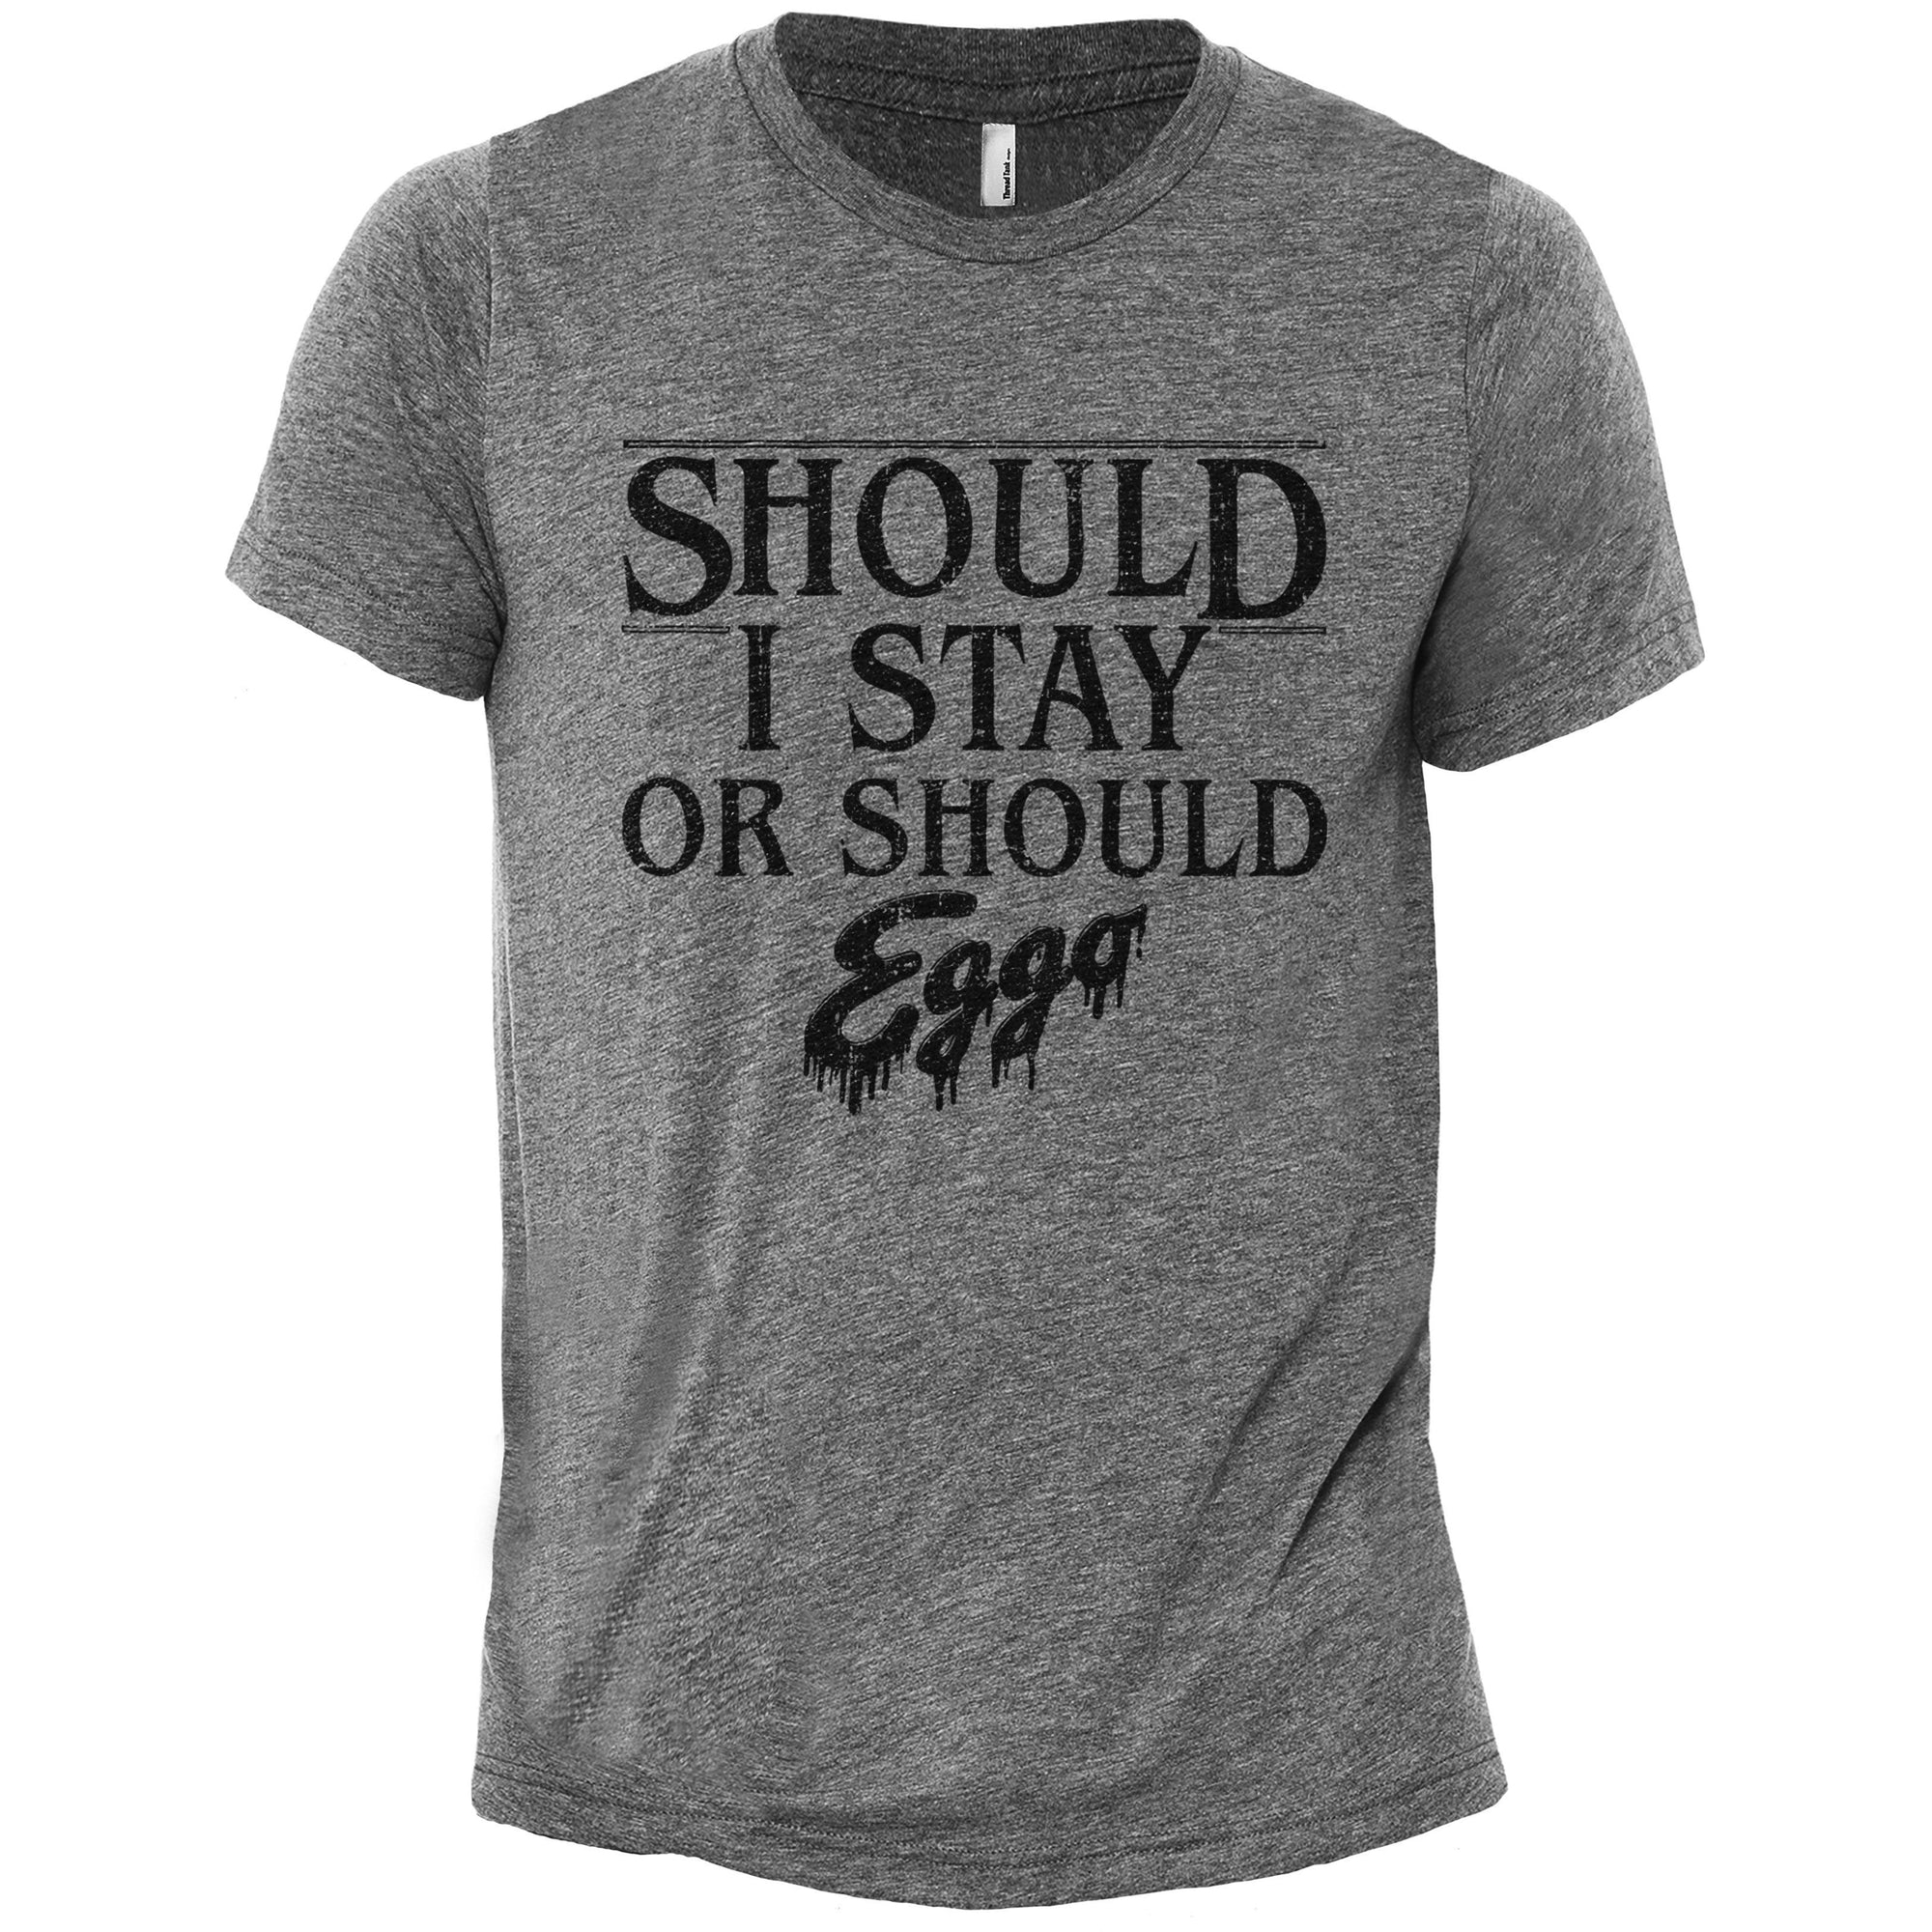 Should I Stay Or Should Eggo - thread tank | Stories you can wear.